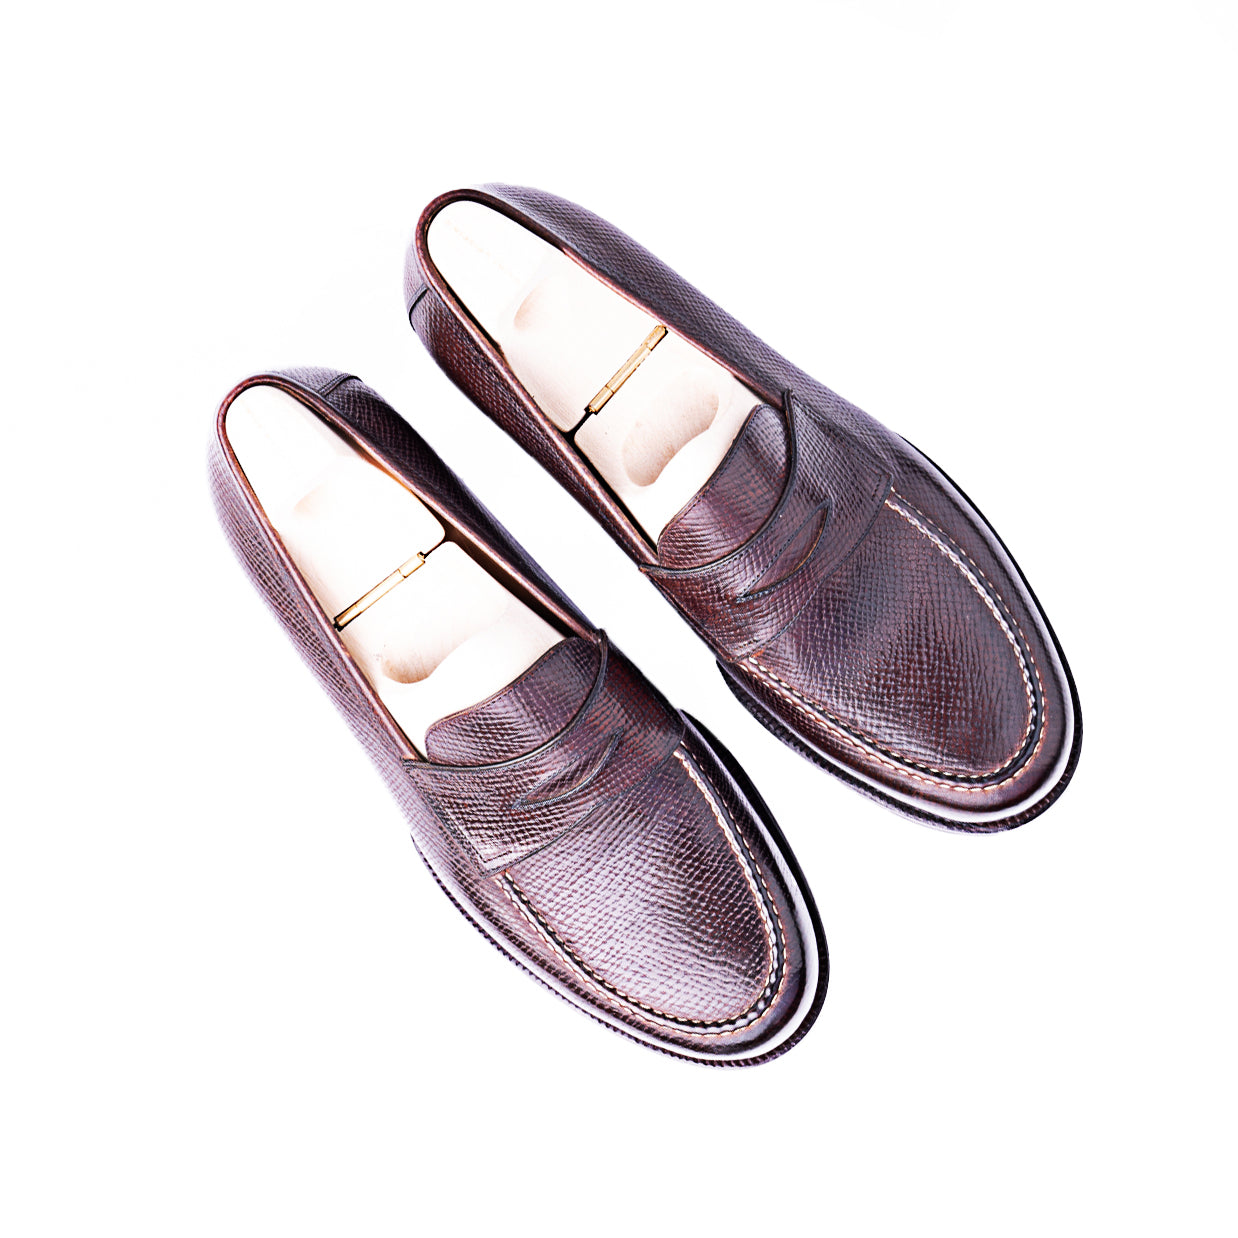 American Penny Loafer with hand stitched apron on Dock last